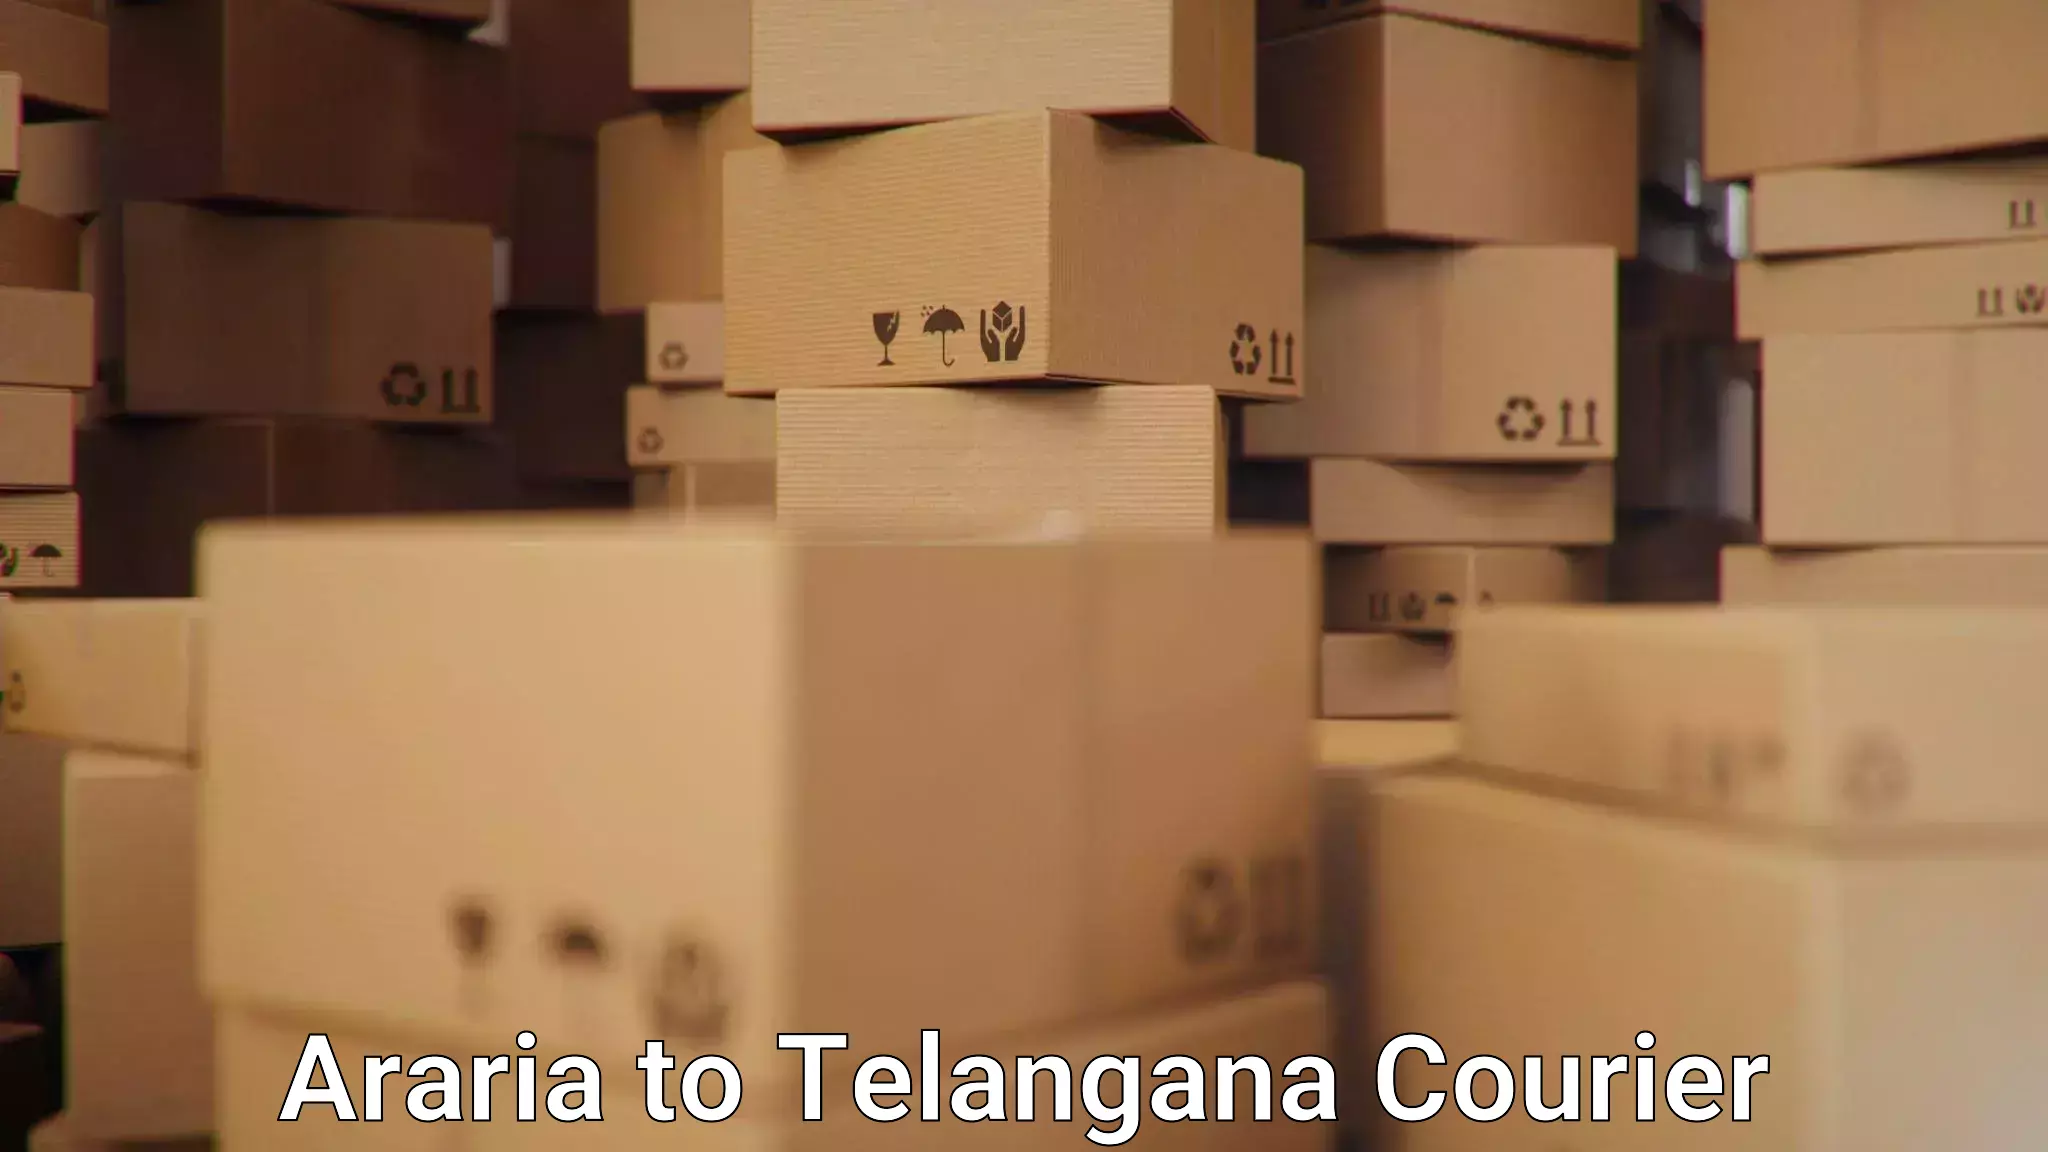 24-hour courier services Araria to Amangal